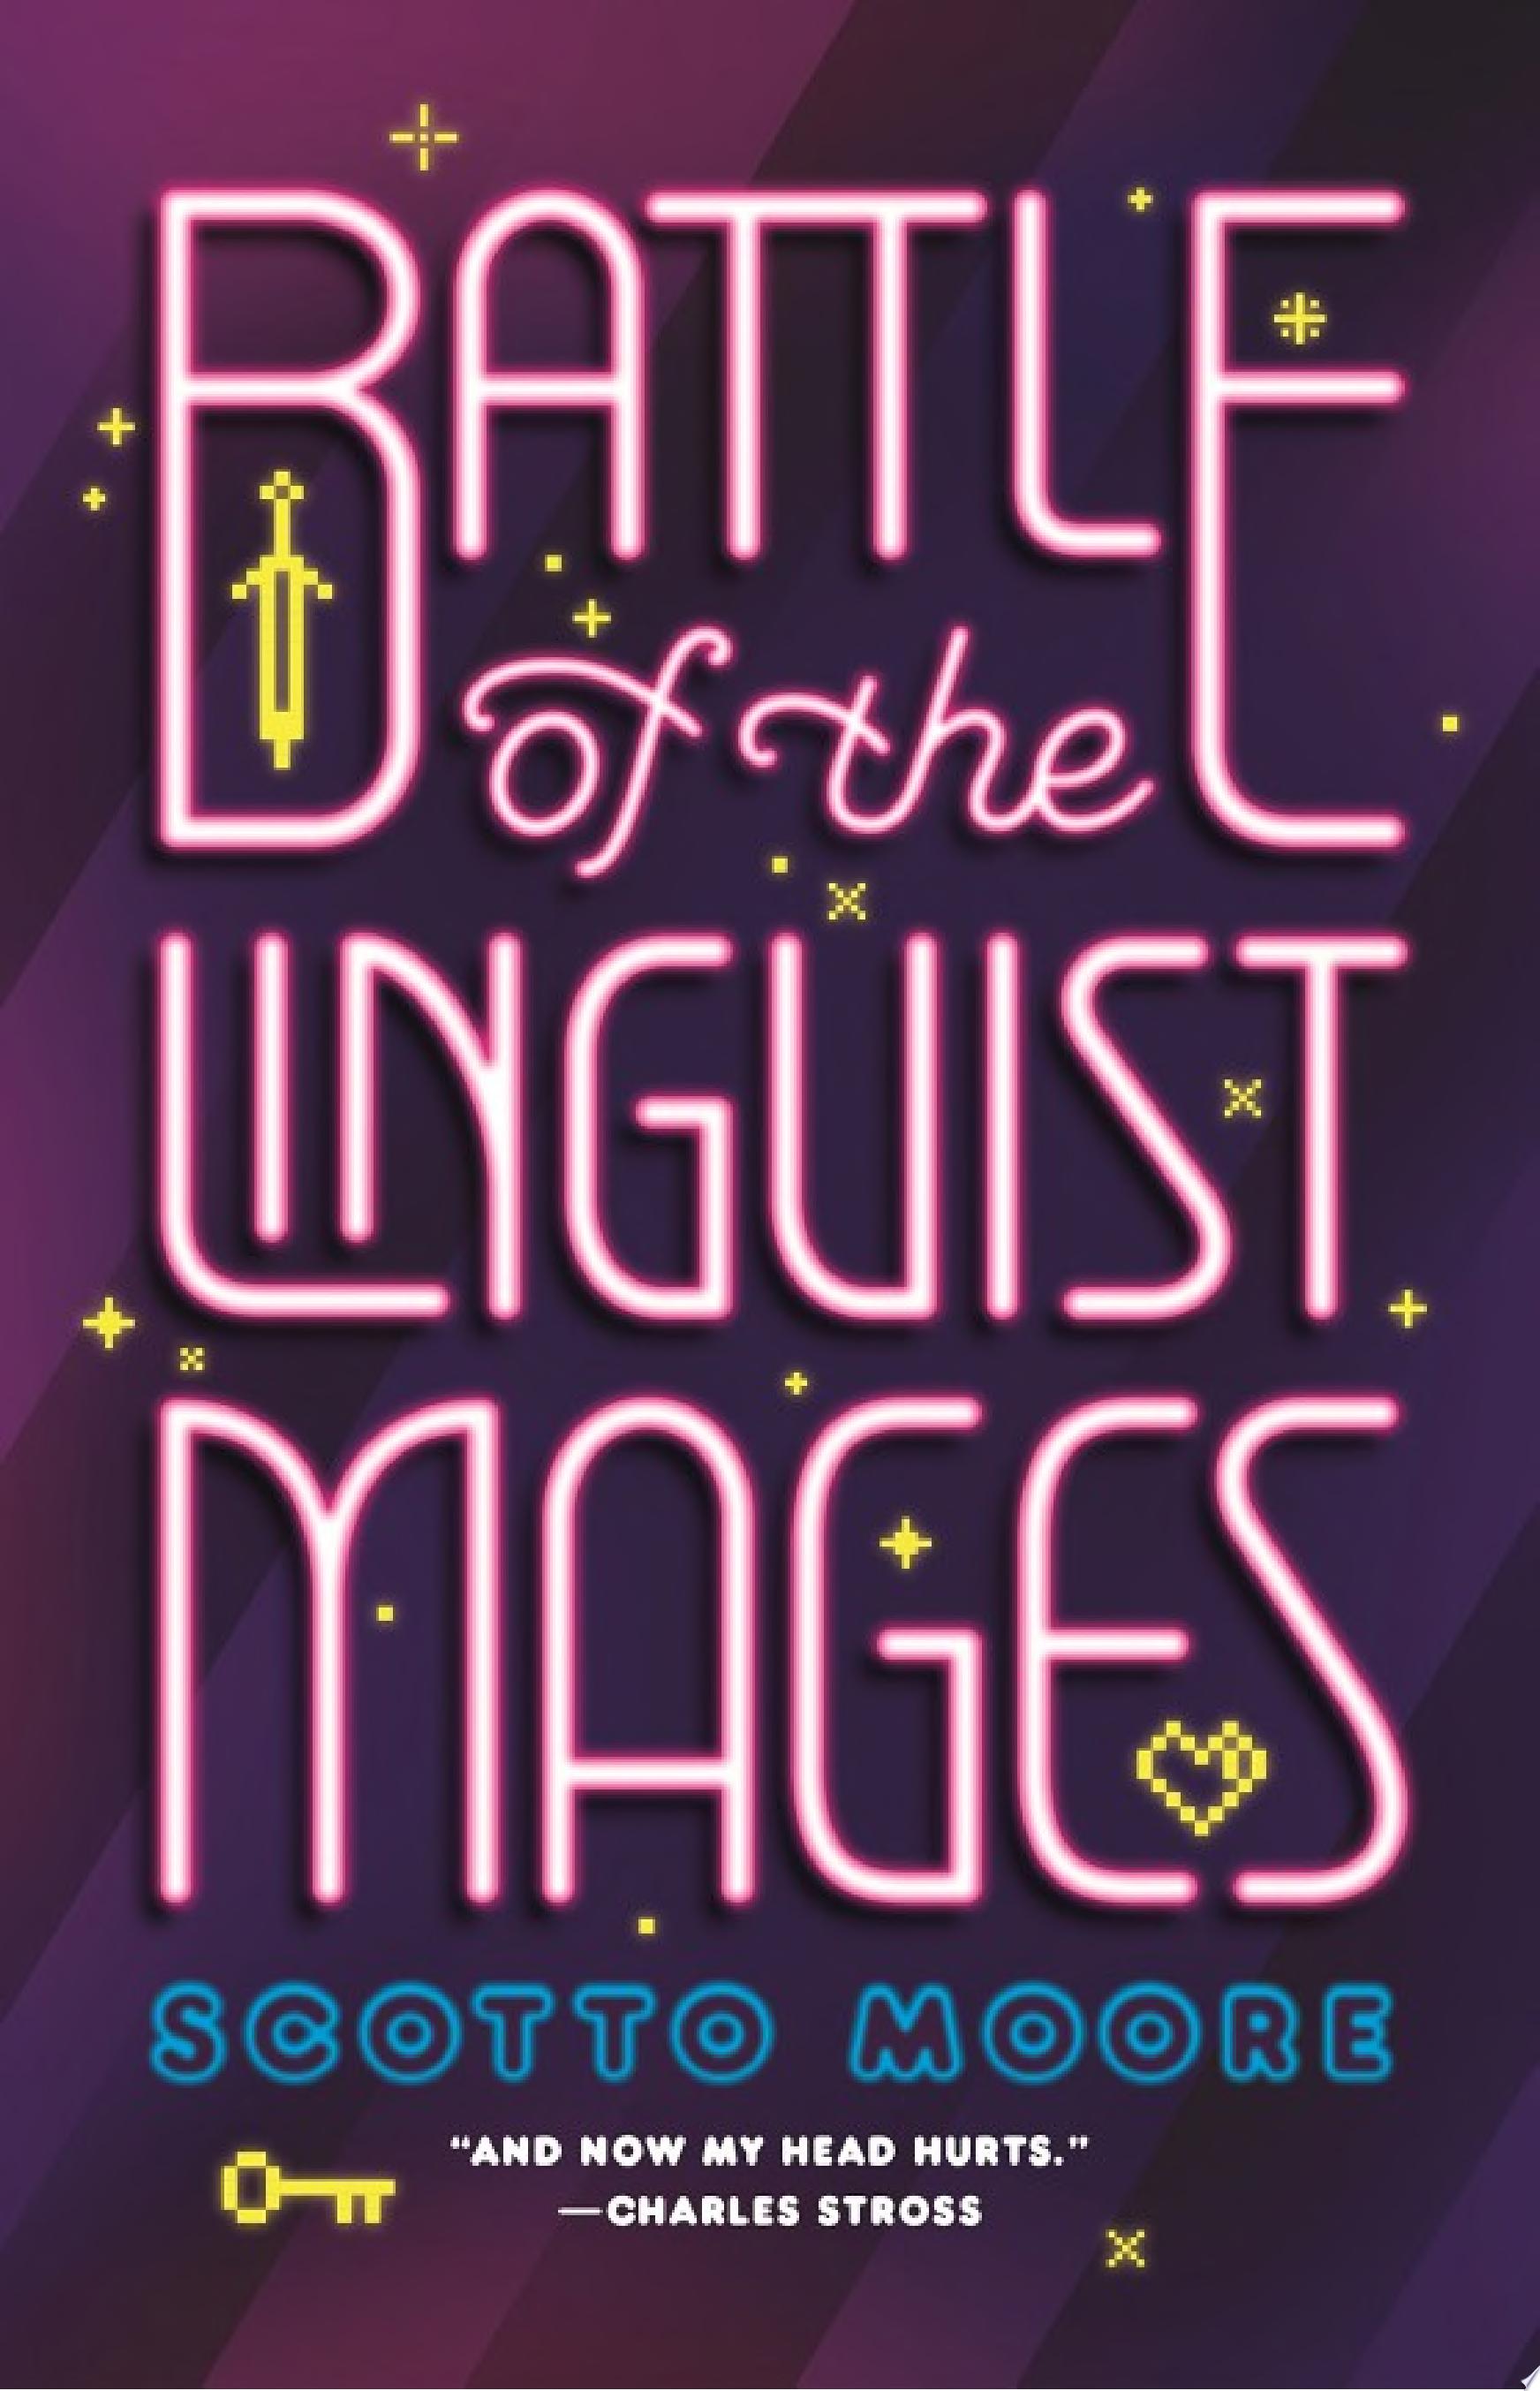 Image for "Battle of the Linguist Mages"